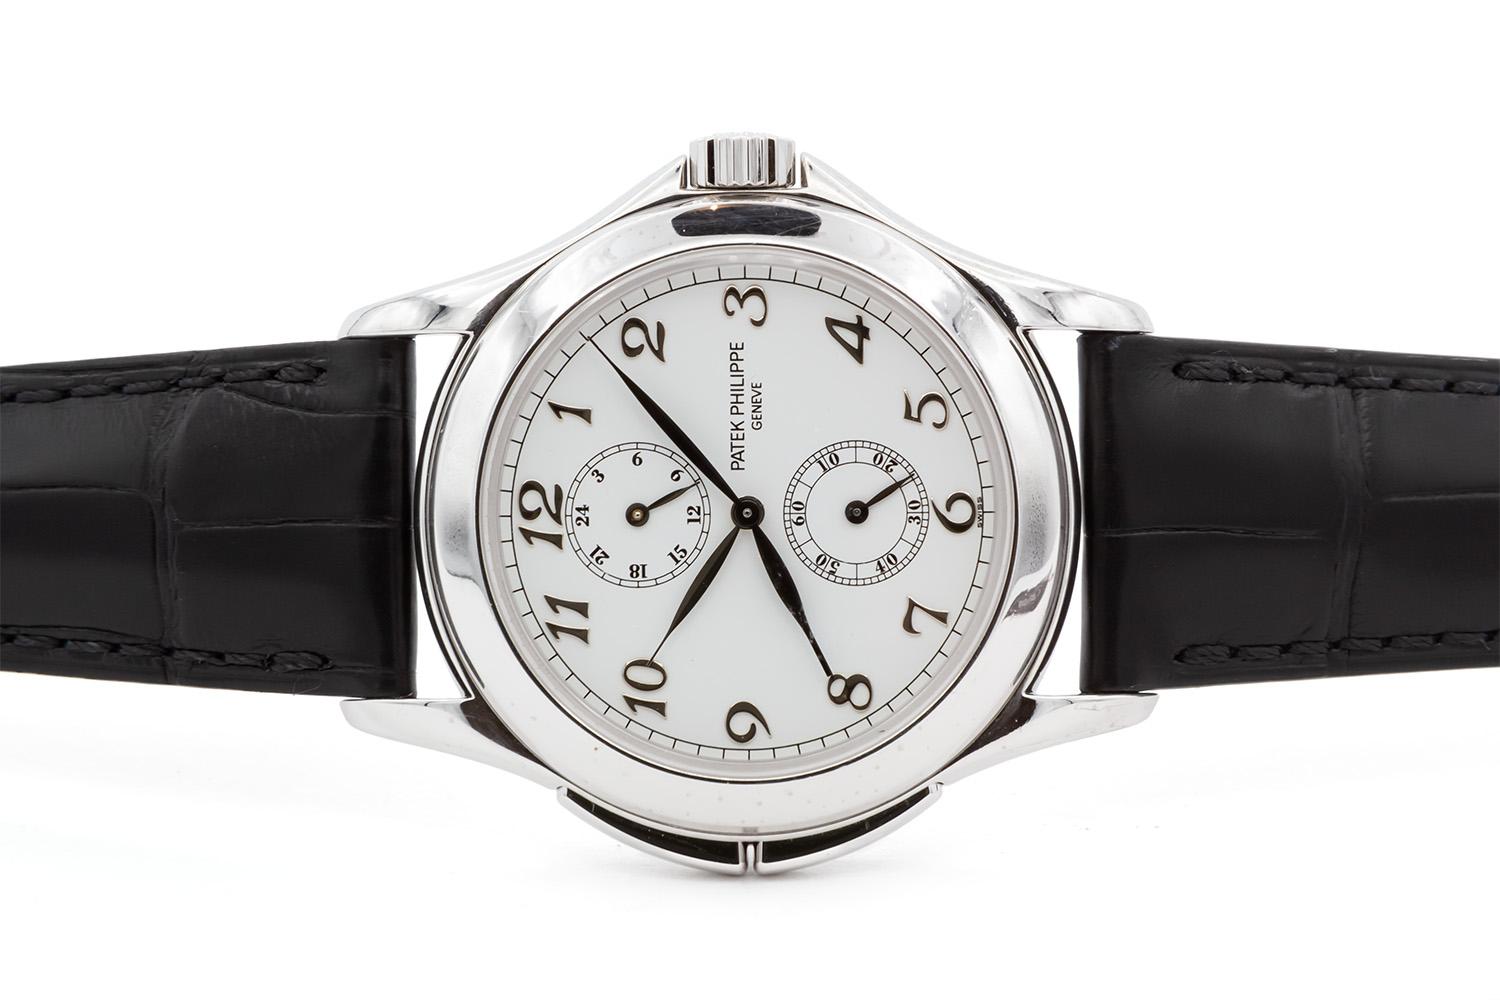 We are pleased to offer this Patek Philippe Calatrava Travel Time 5134G which was just serviced by Patek Philippe and comes with 2-years of factory warranty. This stunning and elegant watch features a 37mm 18k white gold case surrounding a white